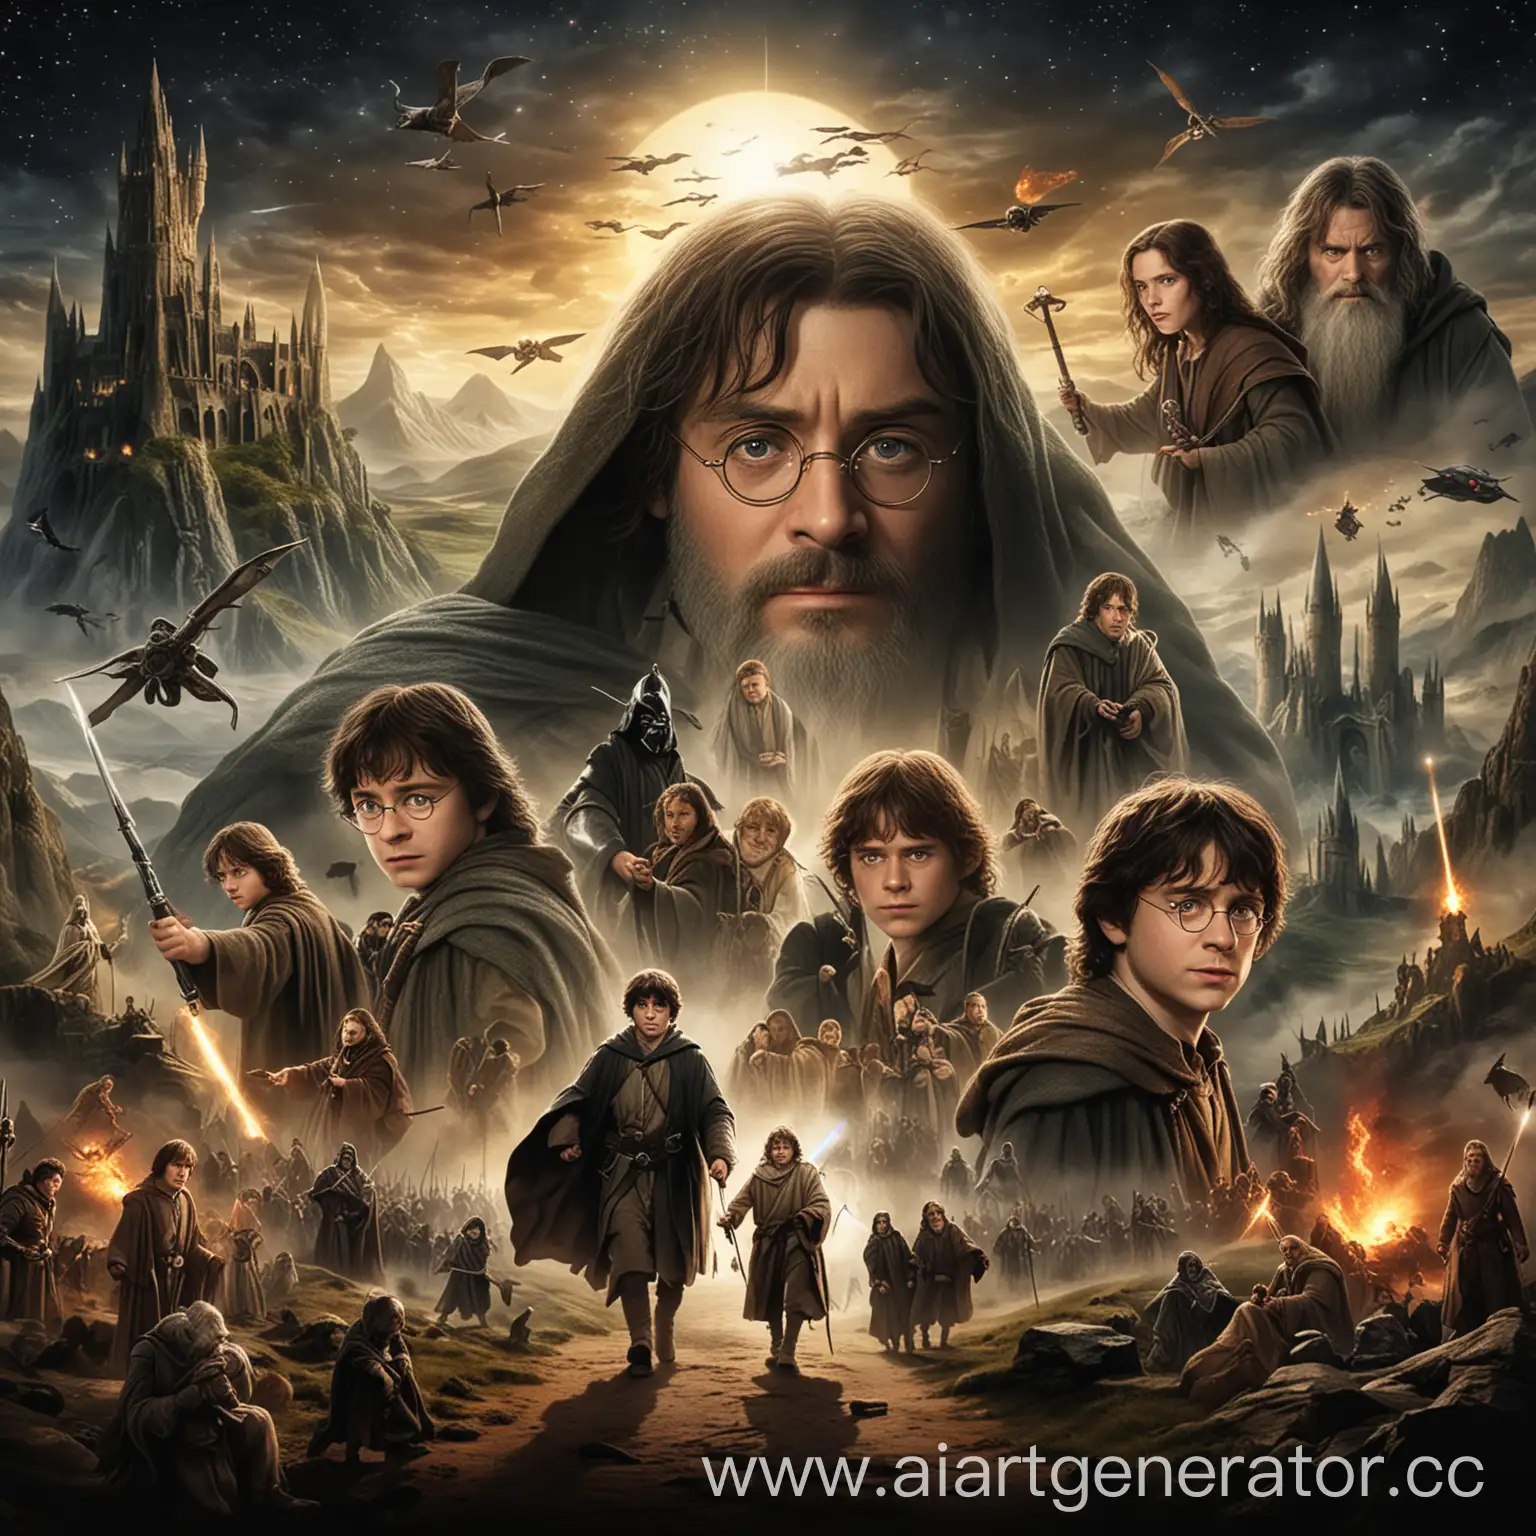 Epic-Mashup-Lord-of-the-Rings-Star-Wars-and-Harry-Potter-Collide-in-Spectacular-Artwork